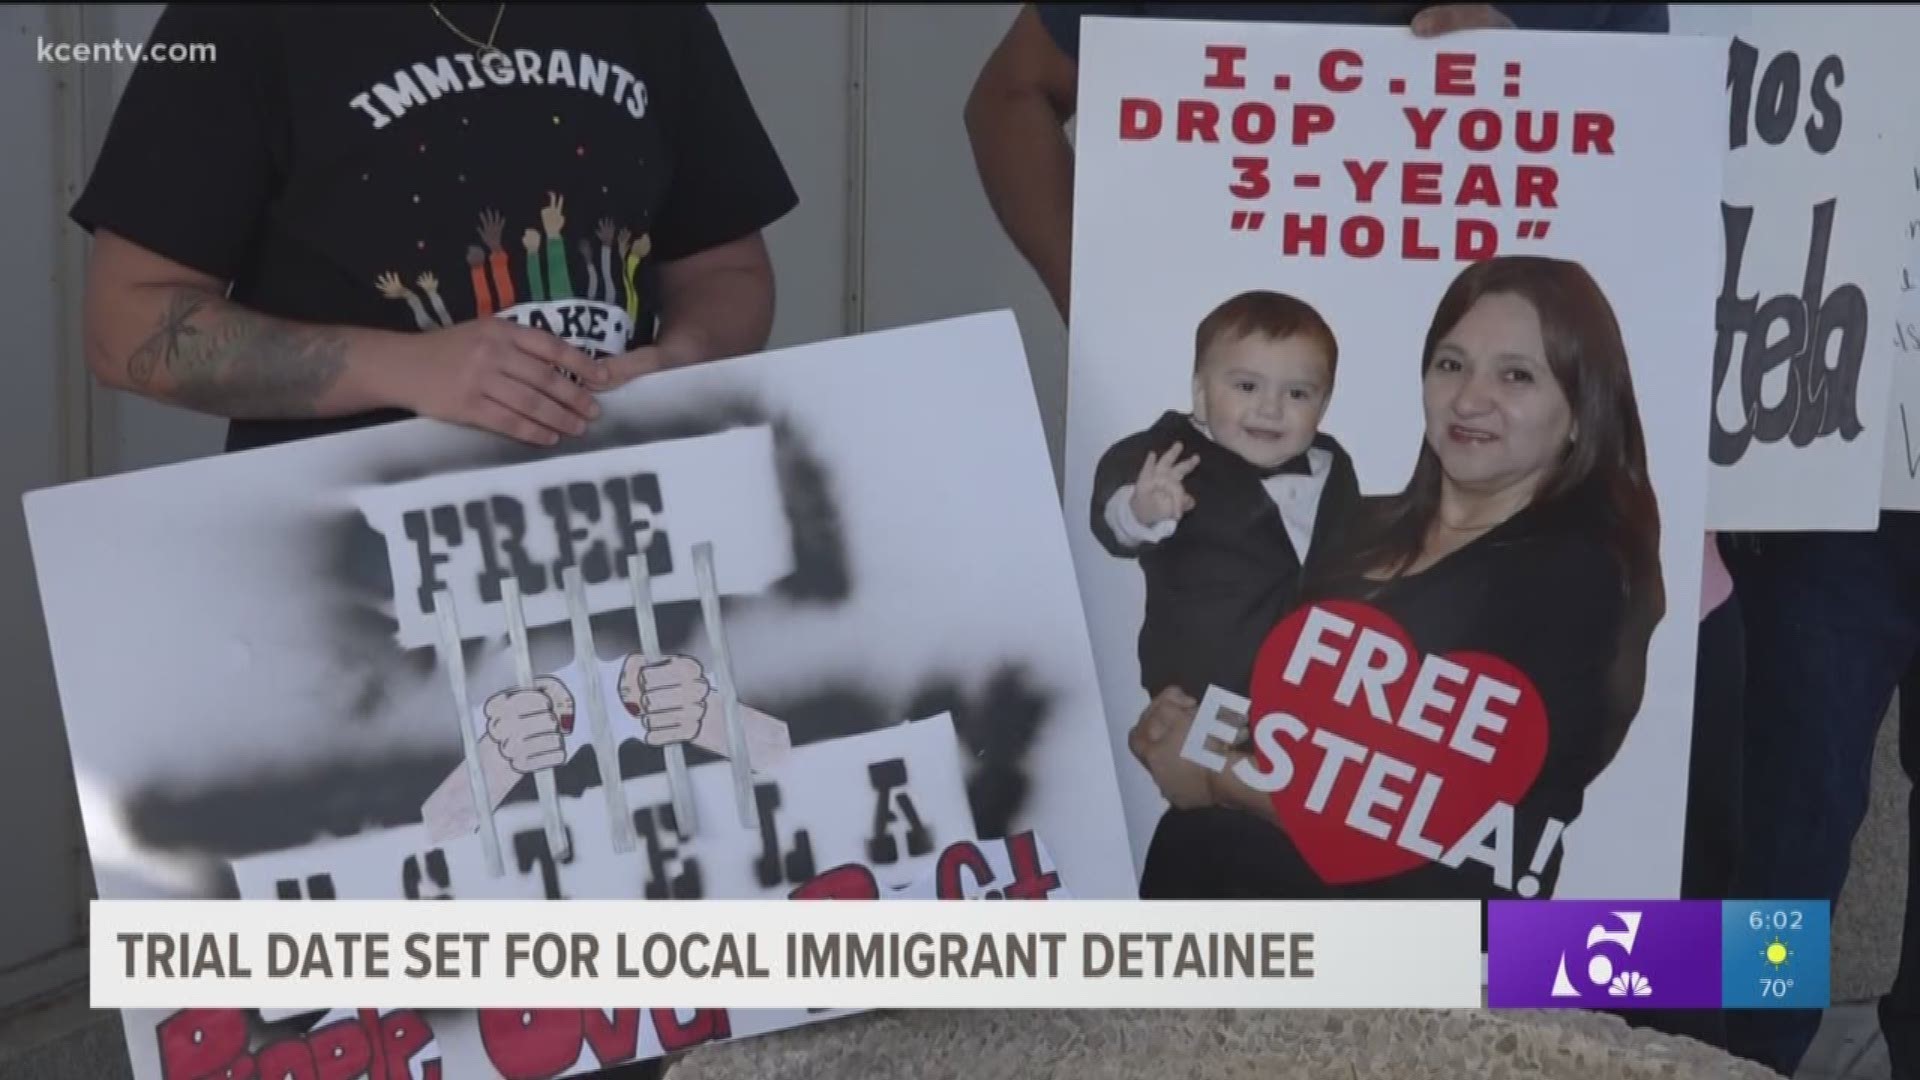 A group of Waco faith leaders, community members, and civil rights groups rallied Thursday in protest of an immigrant detainee at the Jack Harwell Detention Center who has not had a trial after 3 years of incarceration.